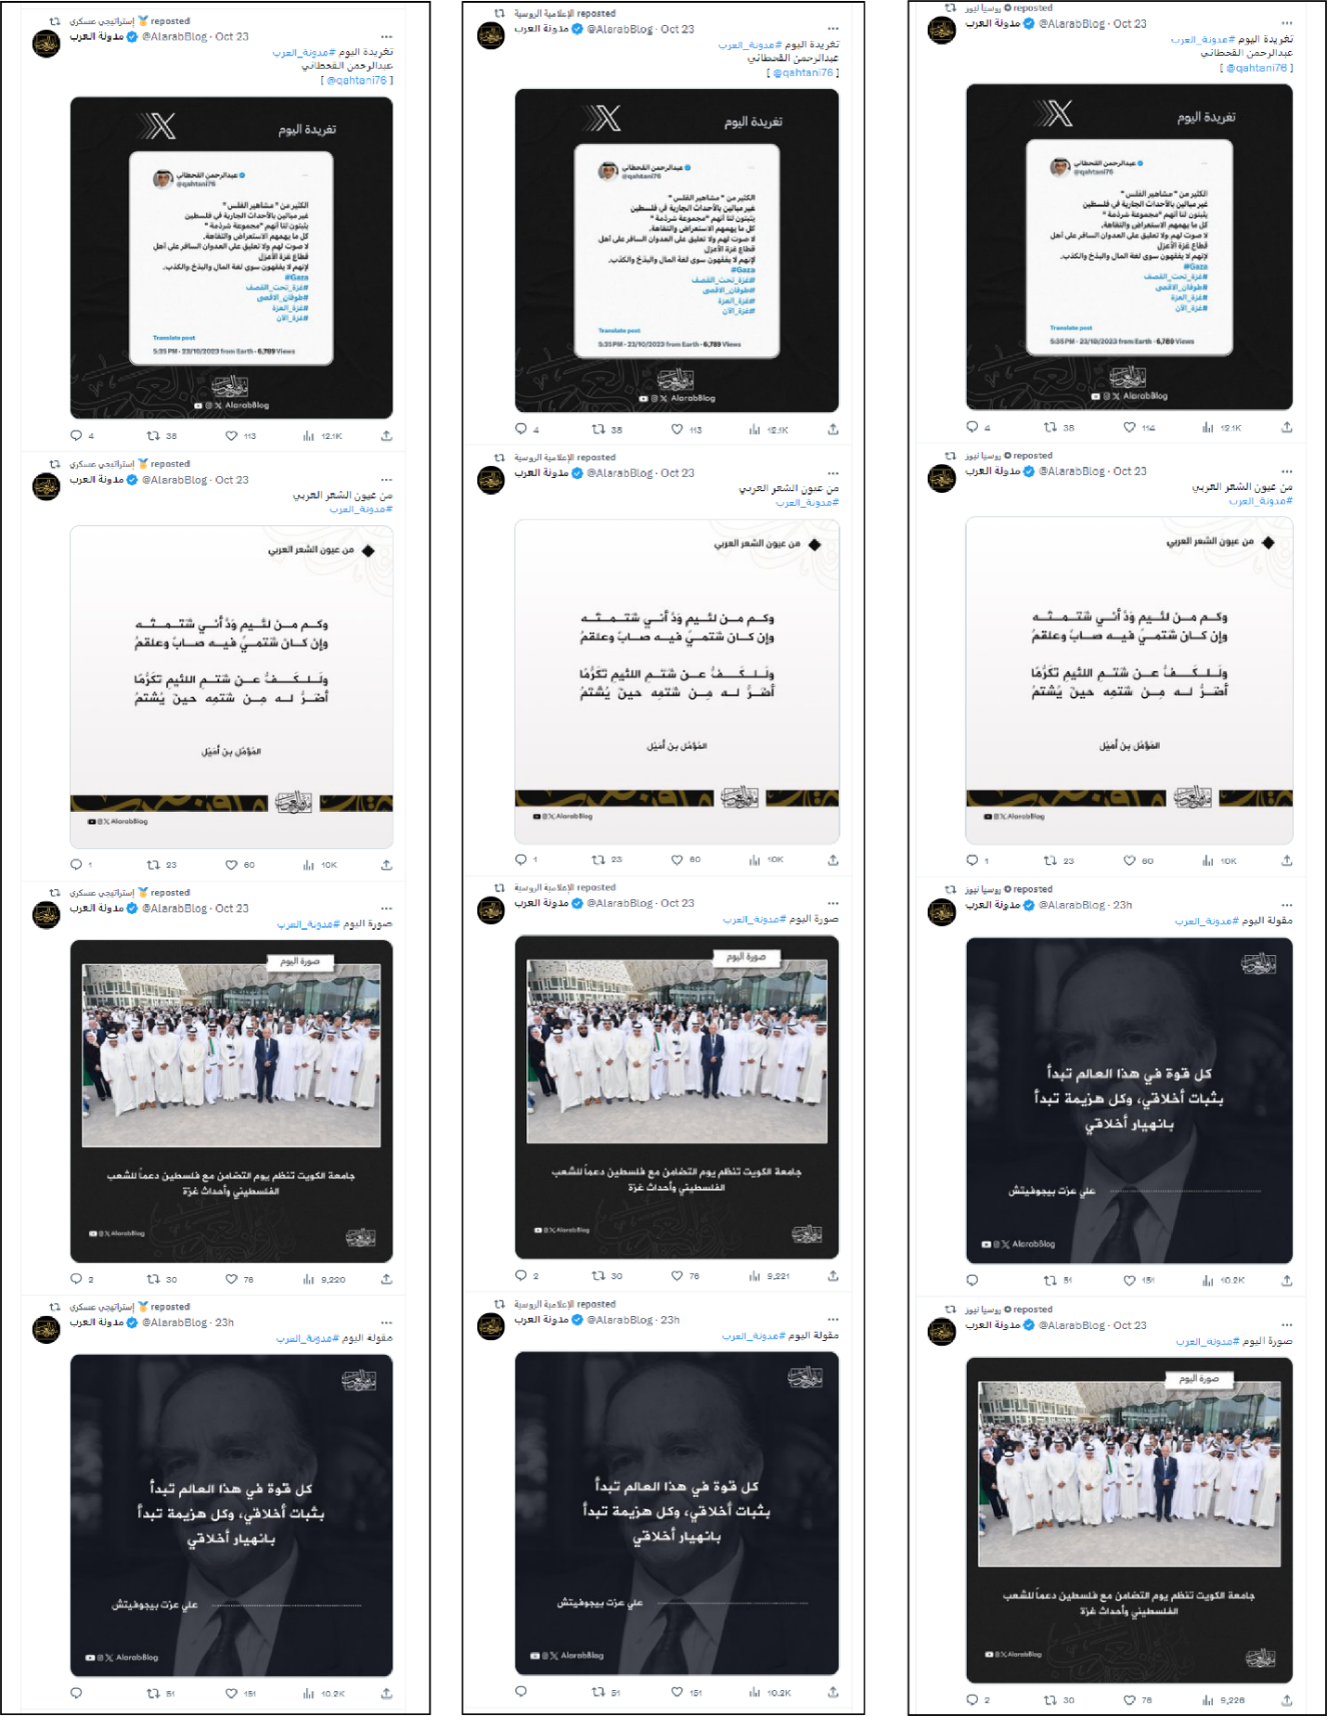 Screenshots showing three different X accounts with similar timelines after retweeting the same posts by @AlarabBlog. (Source: @ISTRATIJI, left; @russiatt, center; @Russian__media, right)